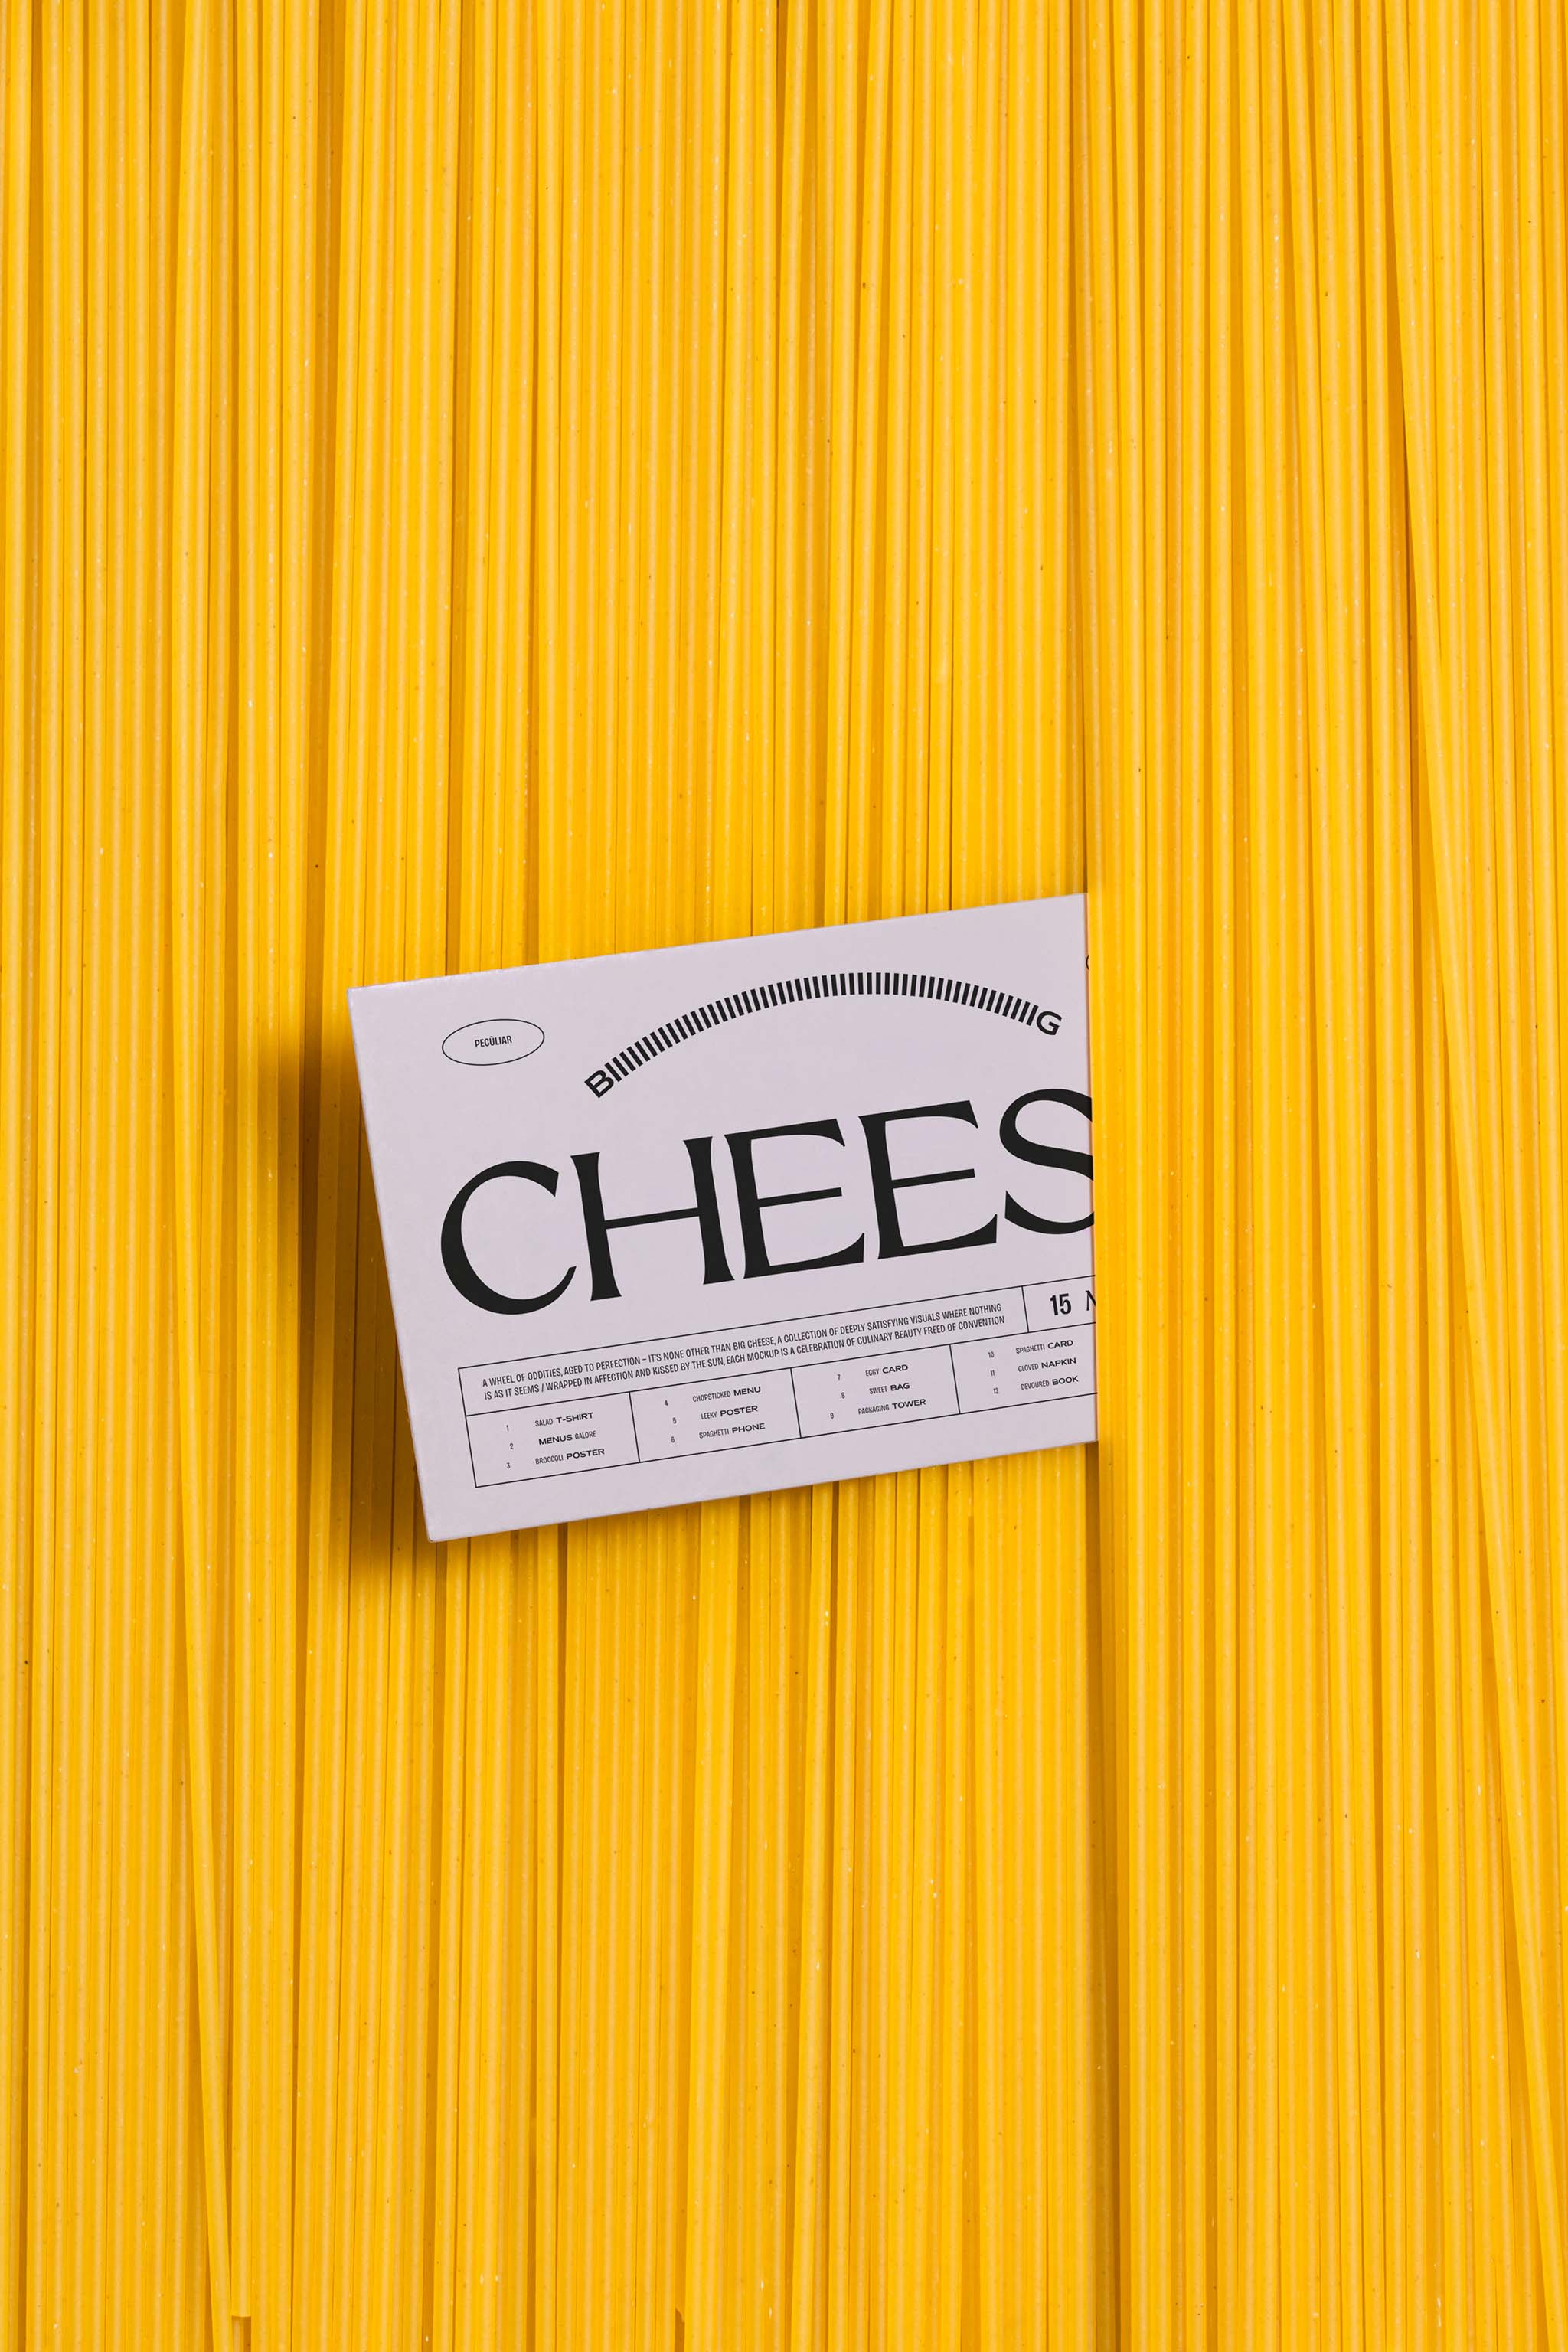 Food photo mockup close-up of vertically aligned spaghetti amid which a business card with black serif design is placed, in use example.